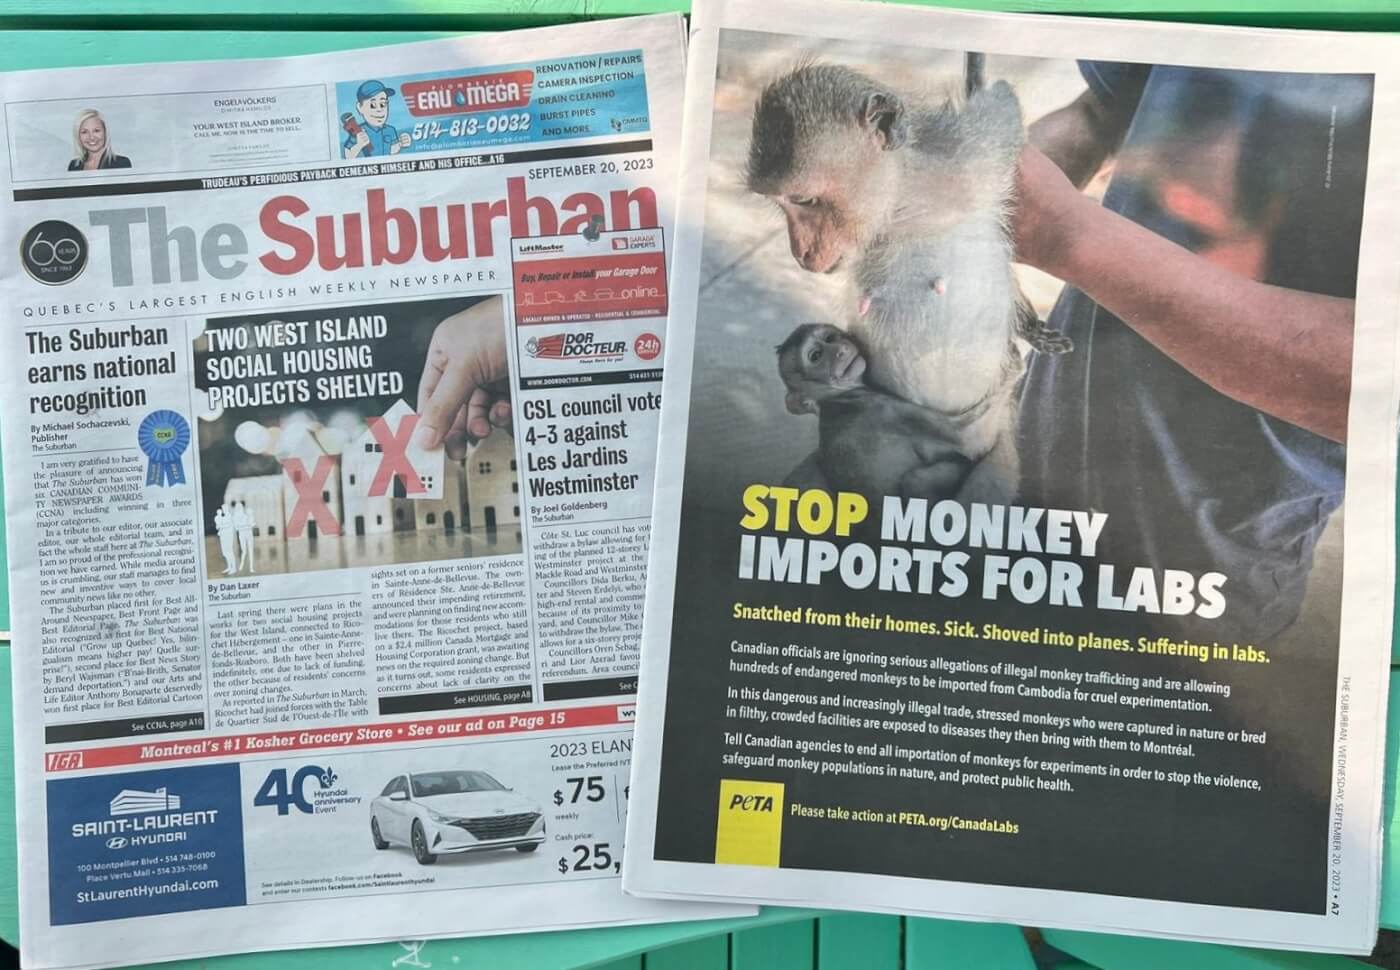 Newspaper pages from The Suburban, with PETA's full page spread included